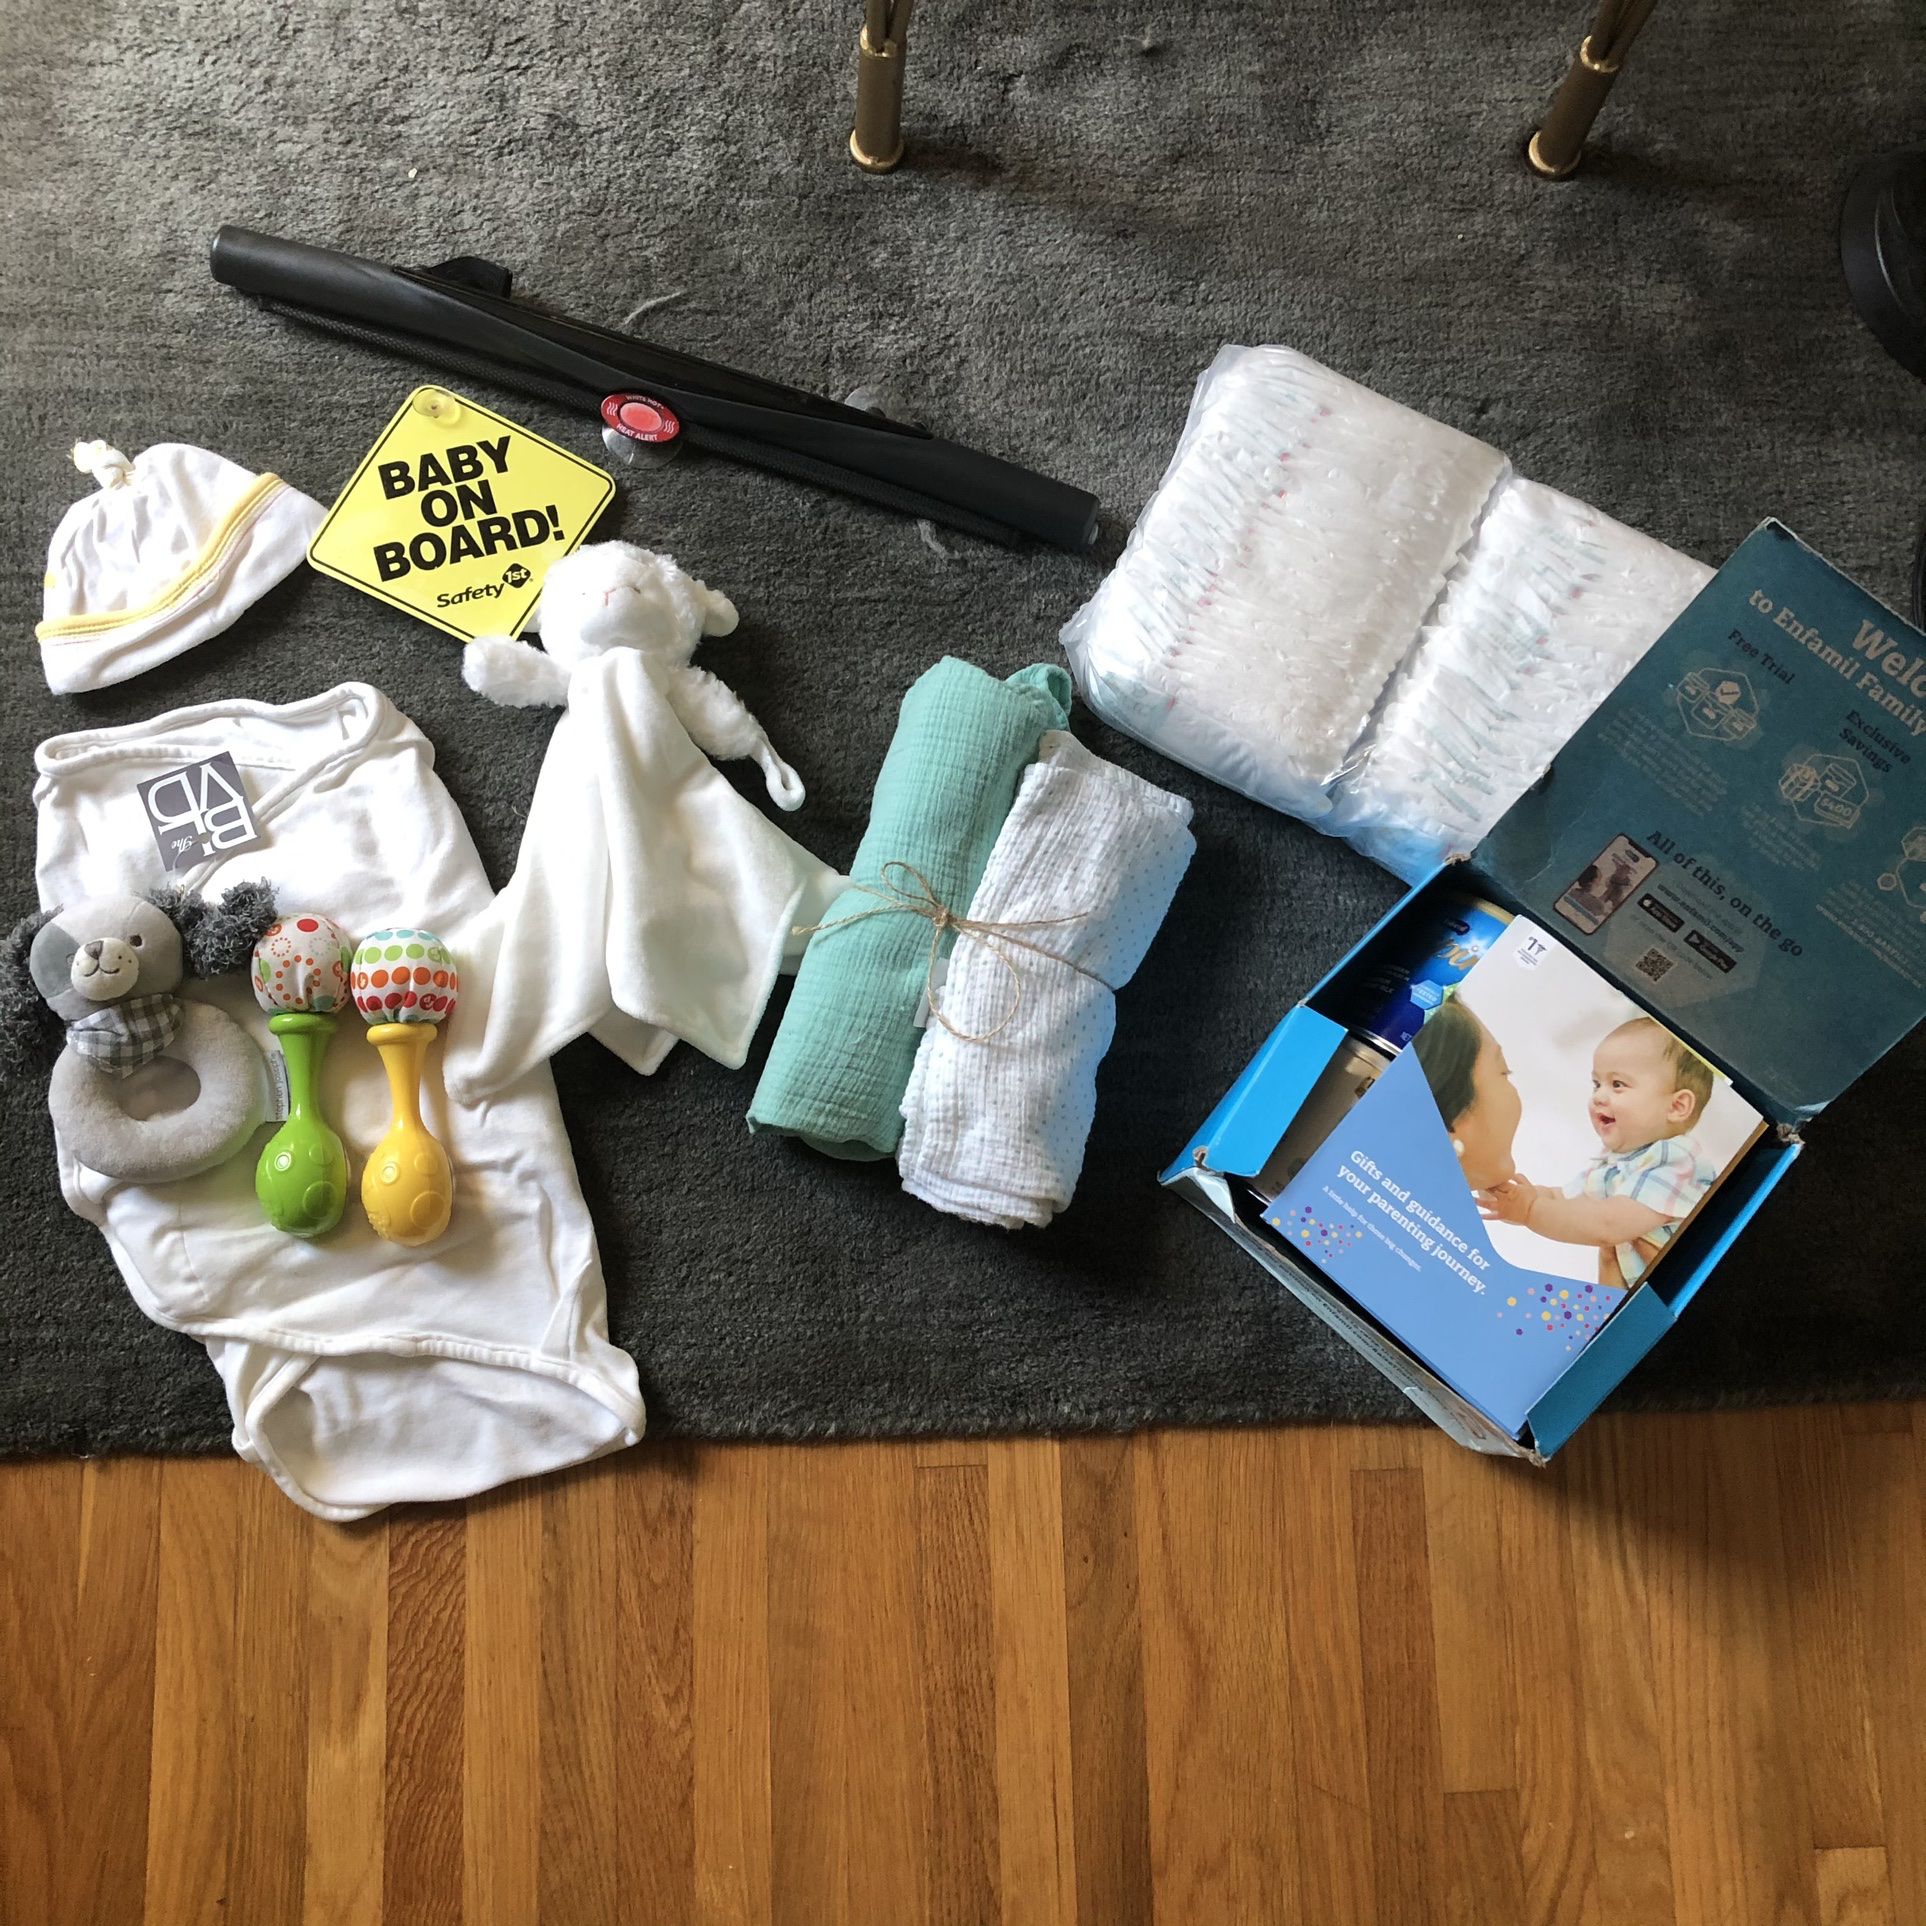 FREE Newborn items Including Diapers And Formula